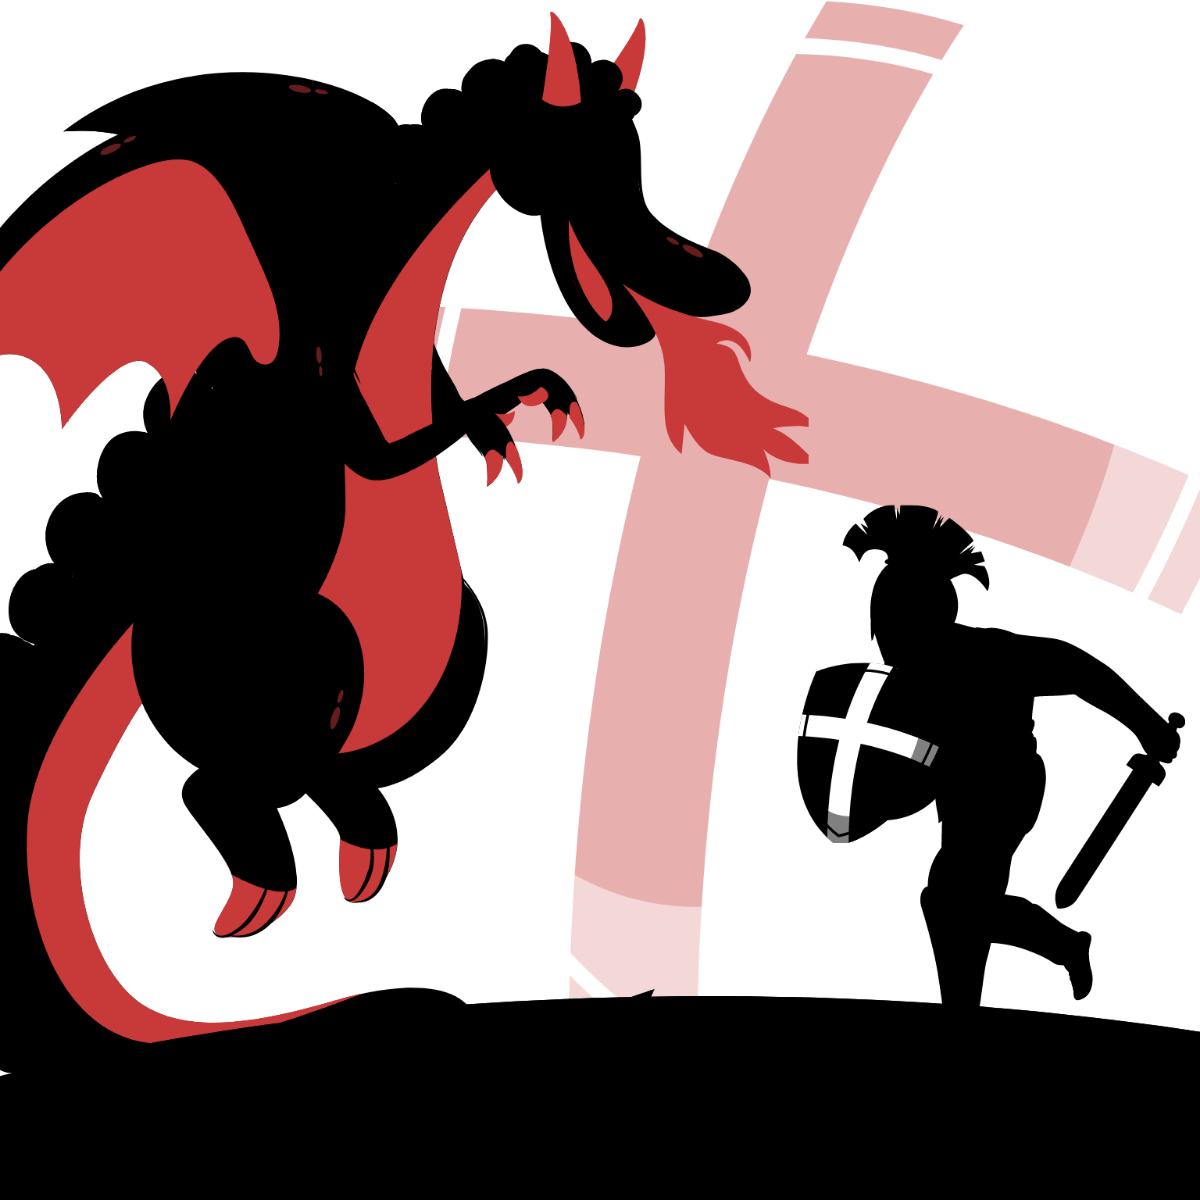 St. George's Day Illustration Template